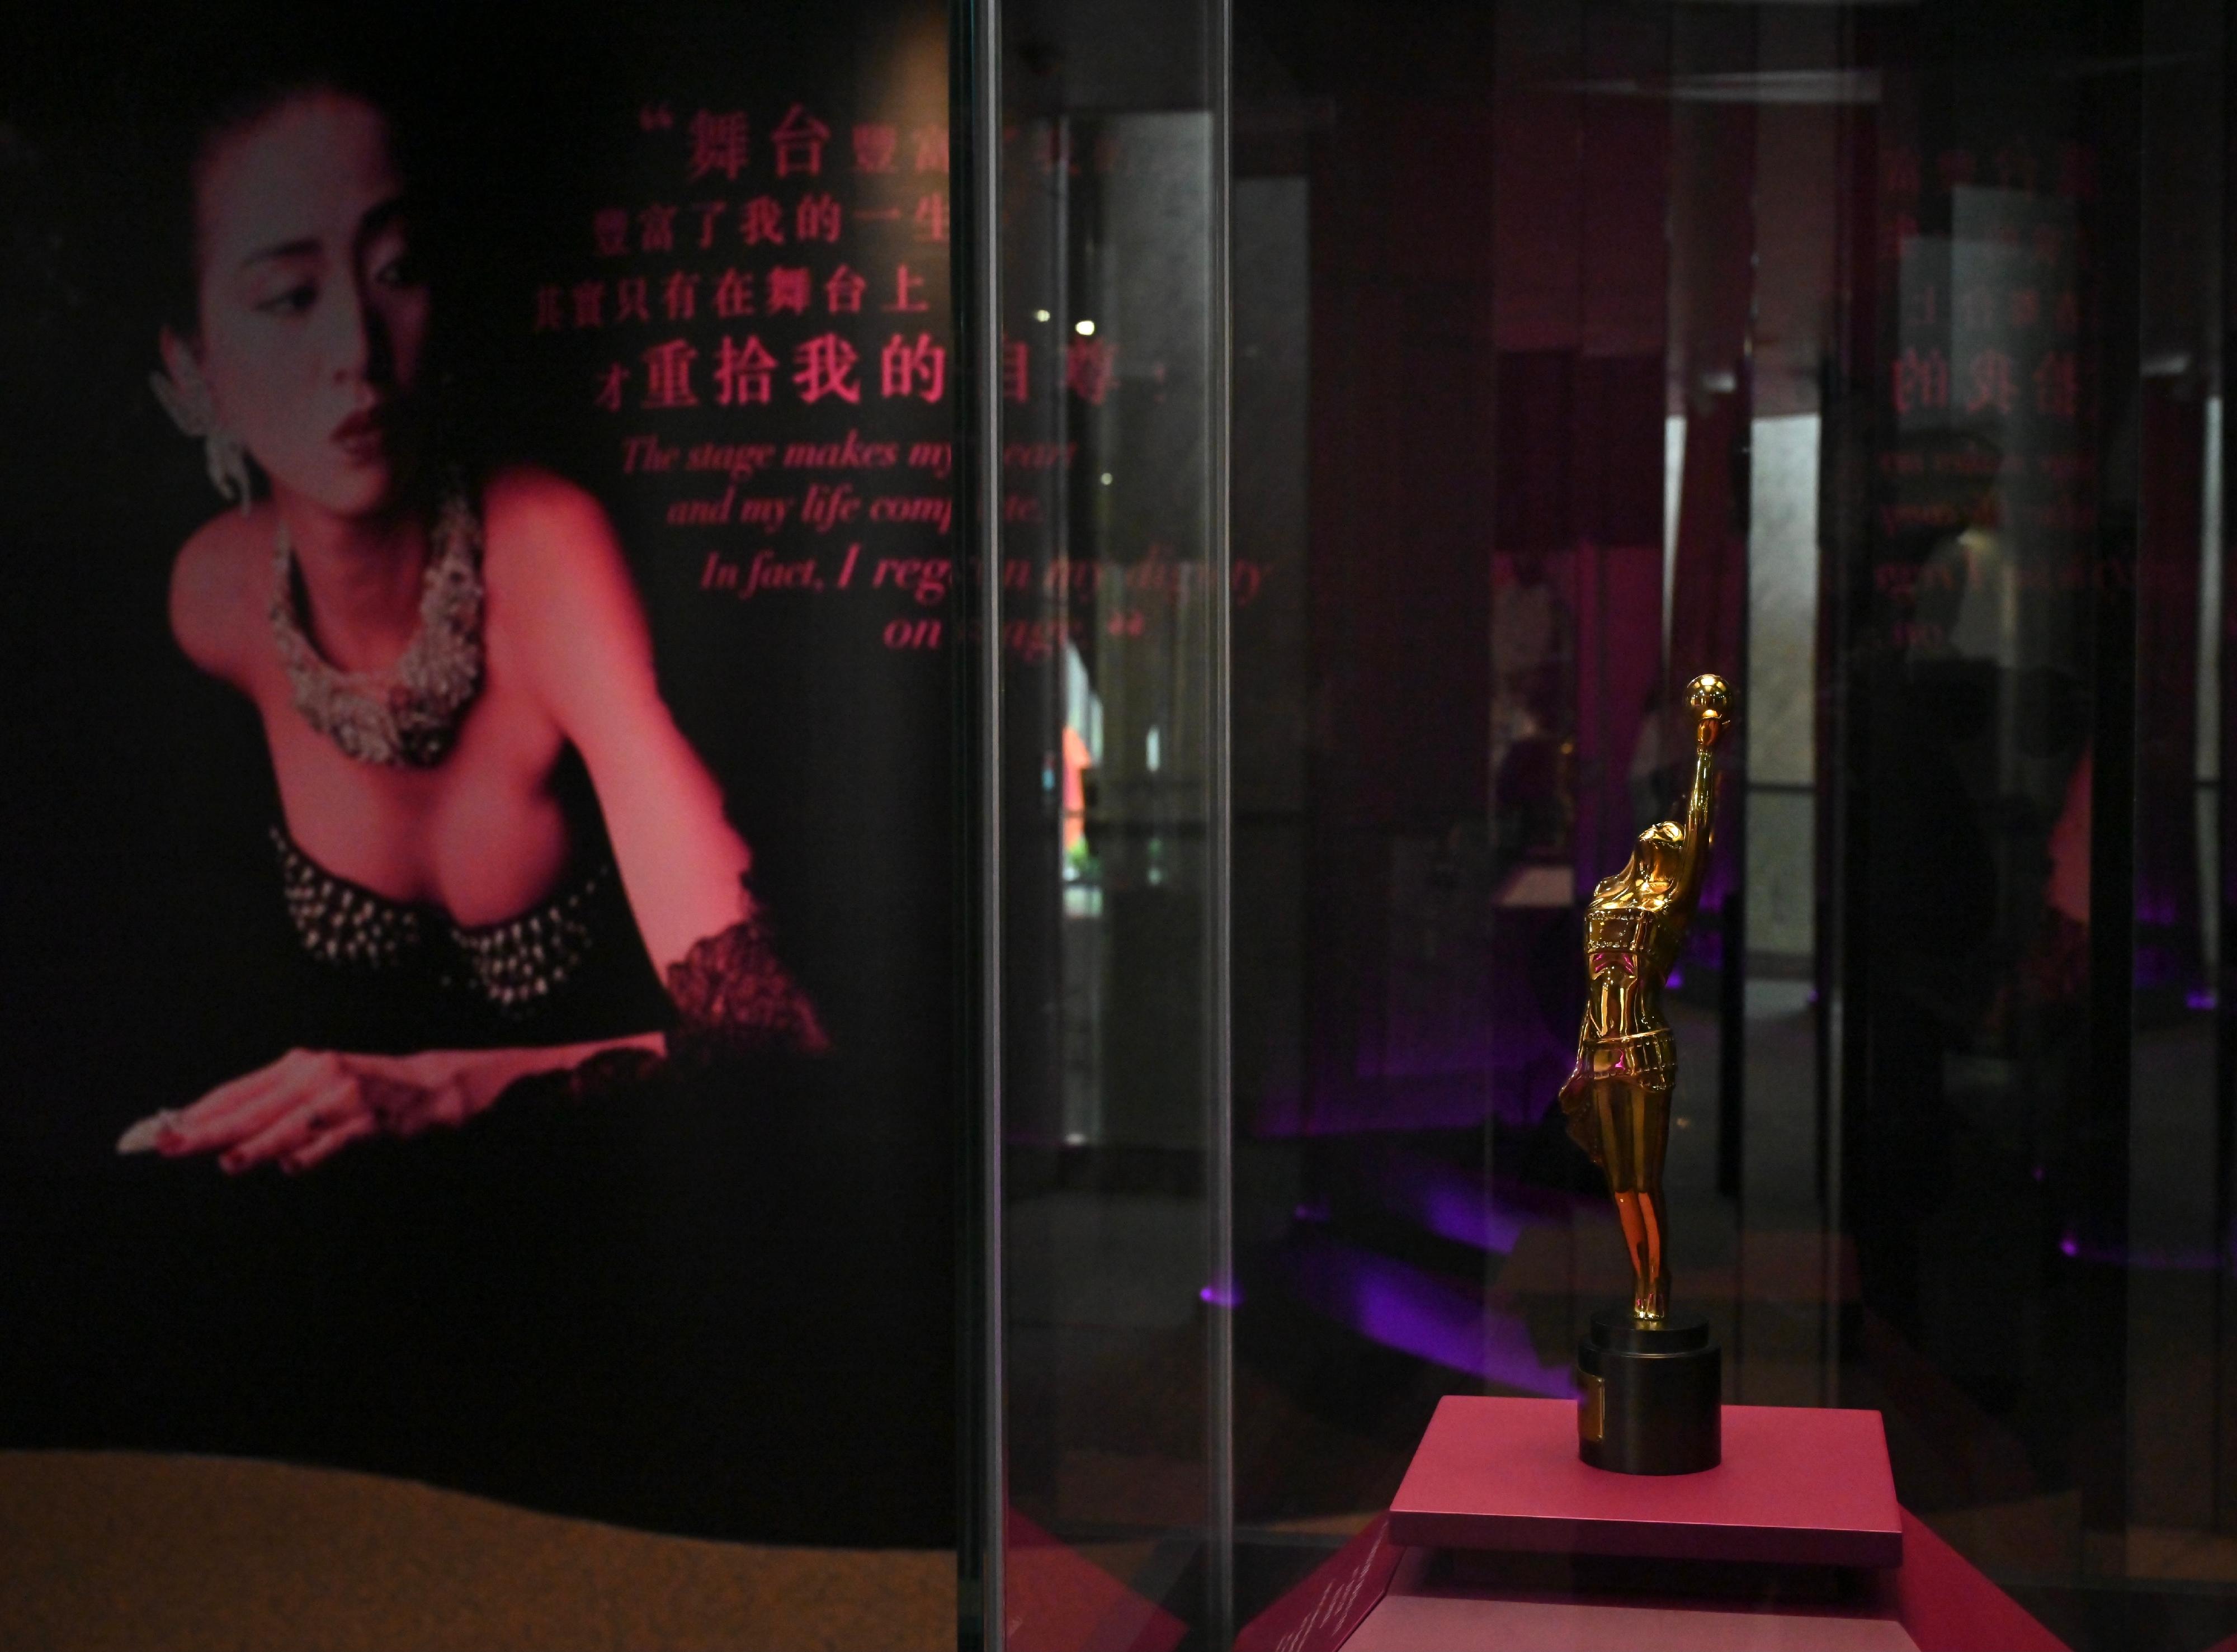 The opening ceremony for the "Timeless Diva: Anita Mui" exhibition was held today (December 23) at the Hong Kong Heritage Museum. Photo shows Anita Mui's trophy for the Timeless Artistic Achievement Award of The 23rd Hong Kong Film Awards.